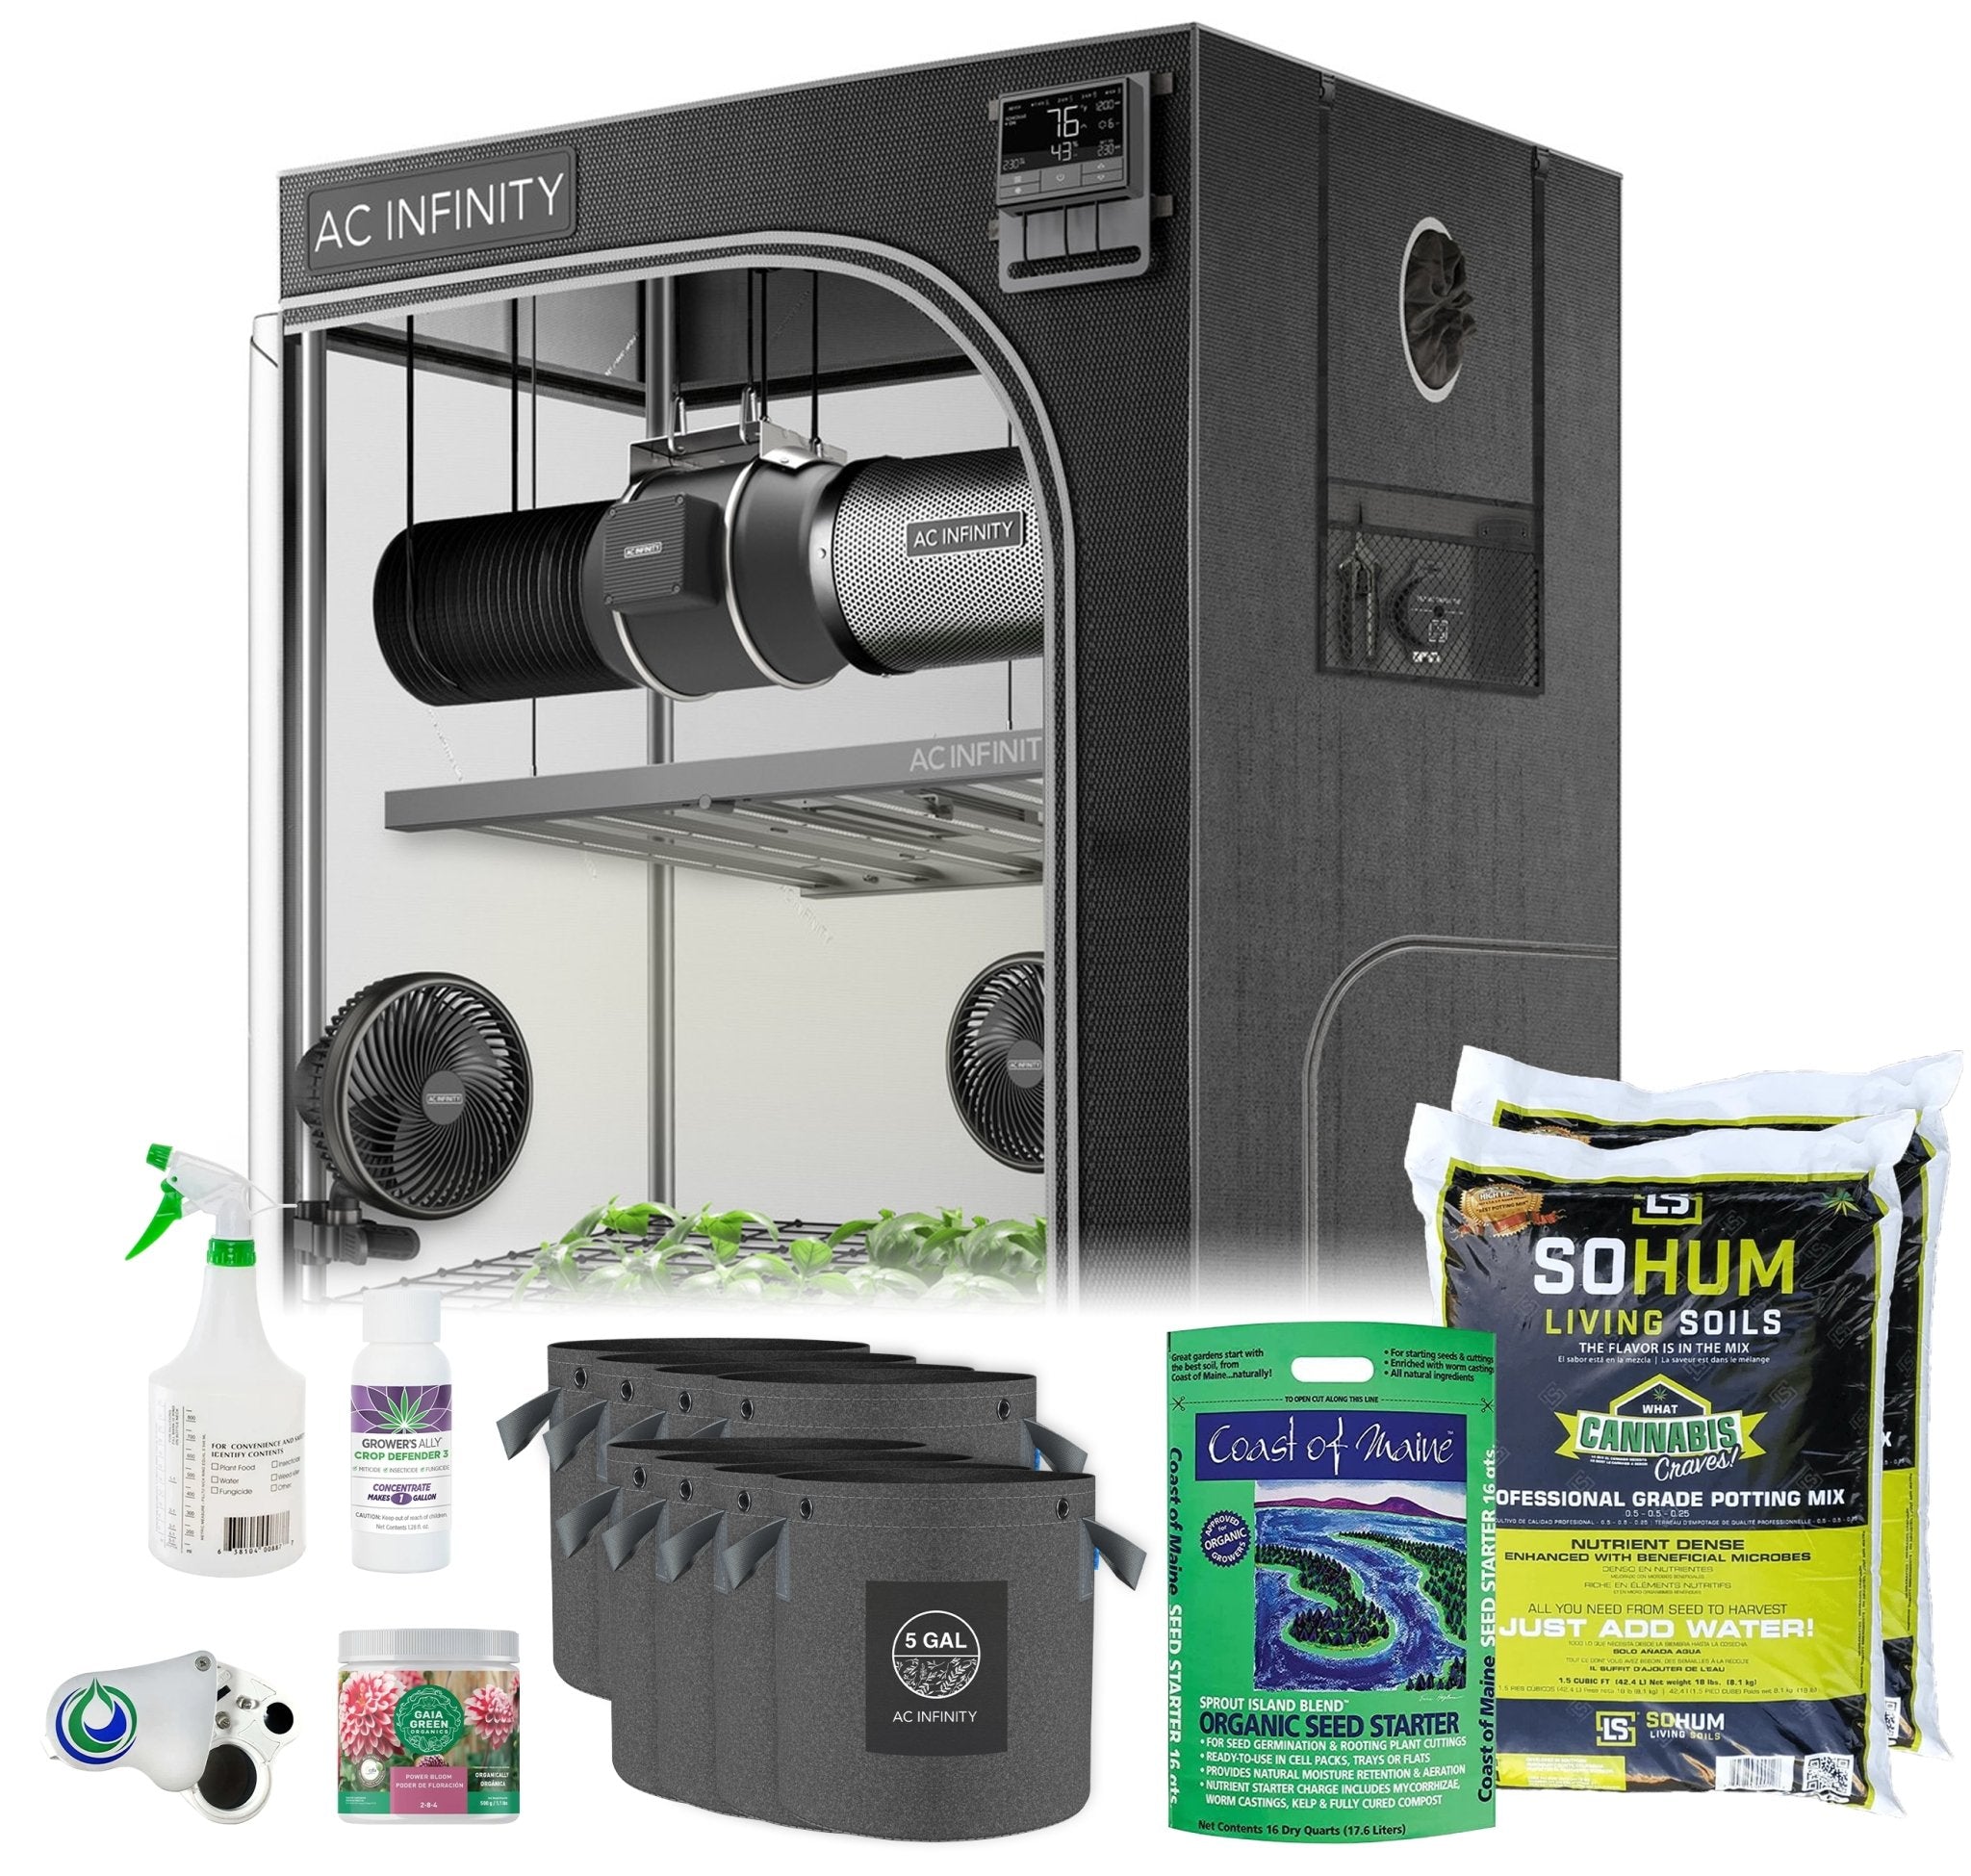 Hydroponics & Growers - GROW TENTS - Advance 2-IN-1 Grow Tents - AC Infinity